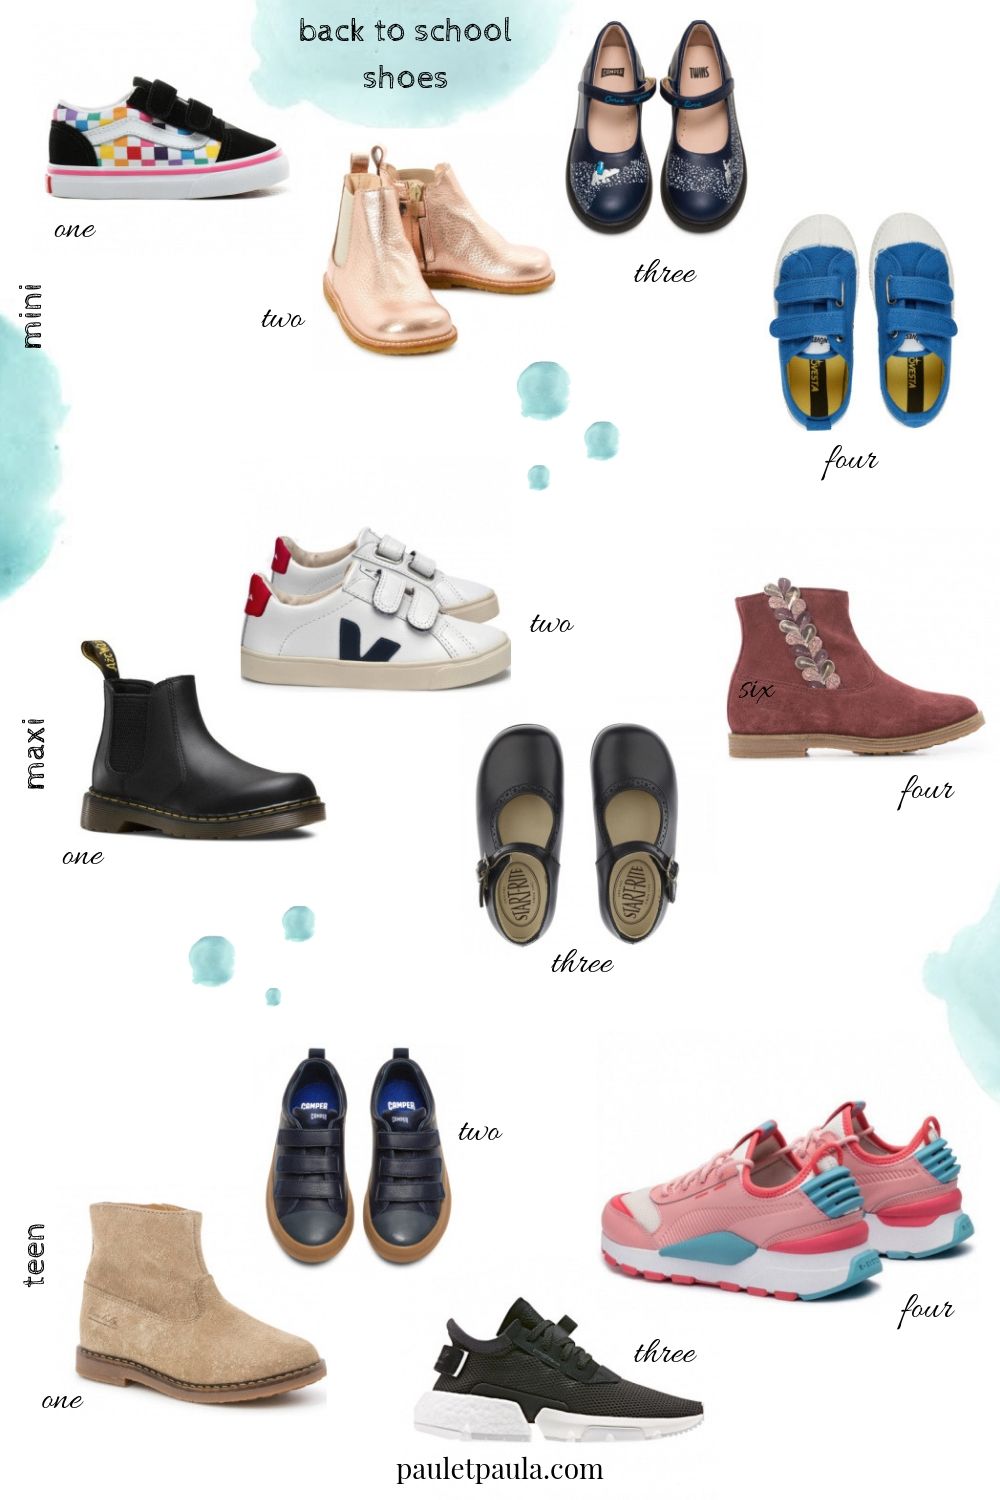 Back to School 2019 - shoes for mini 